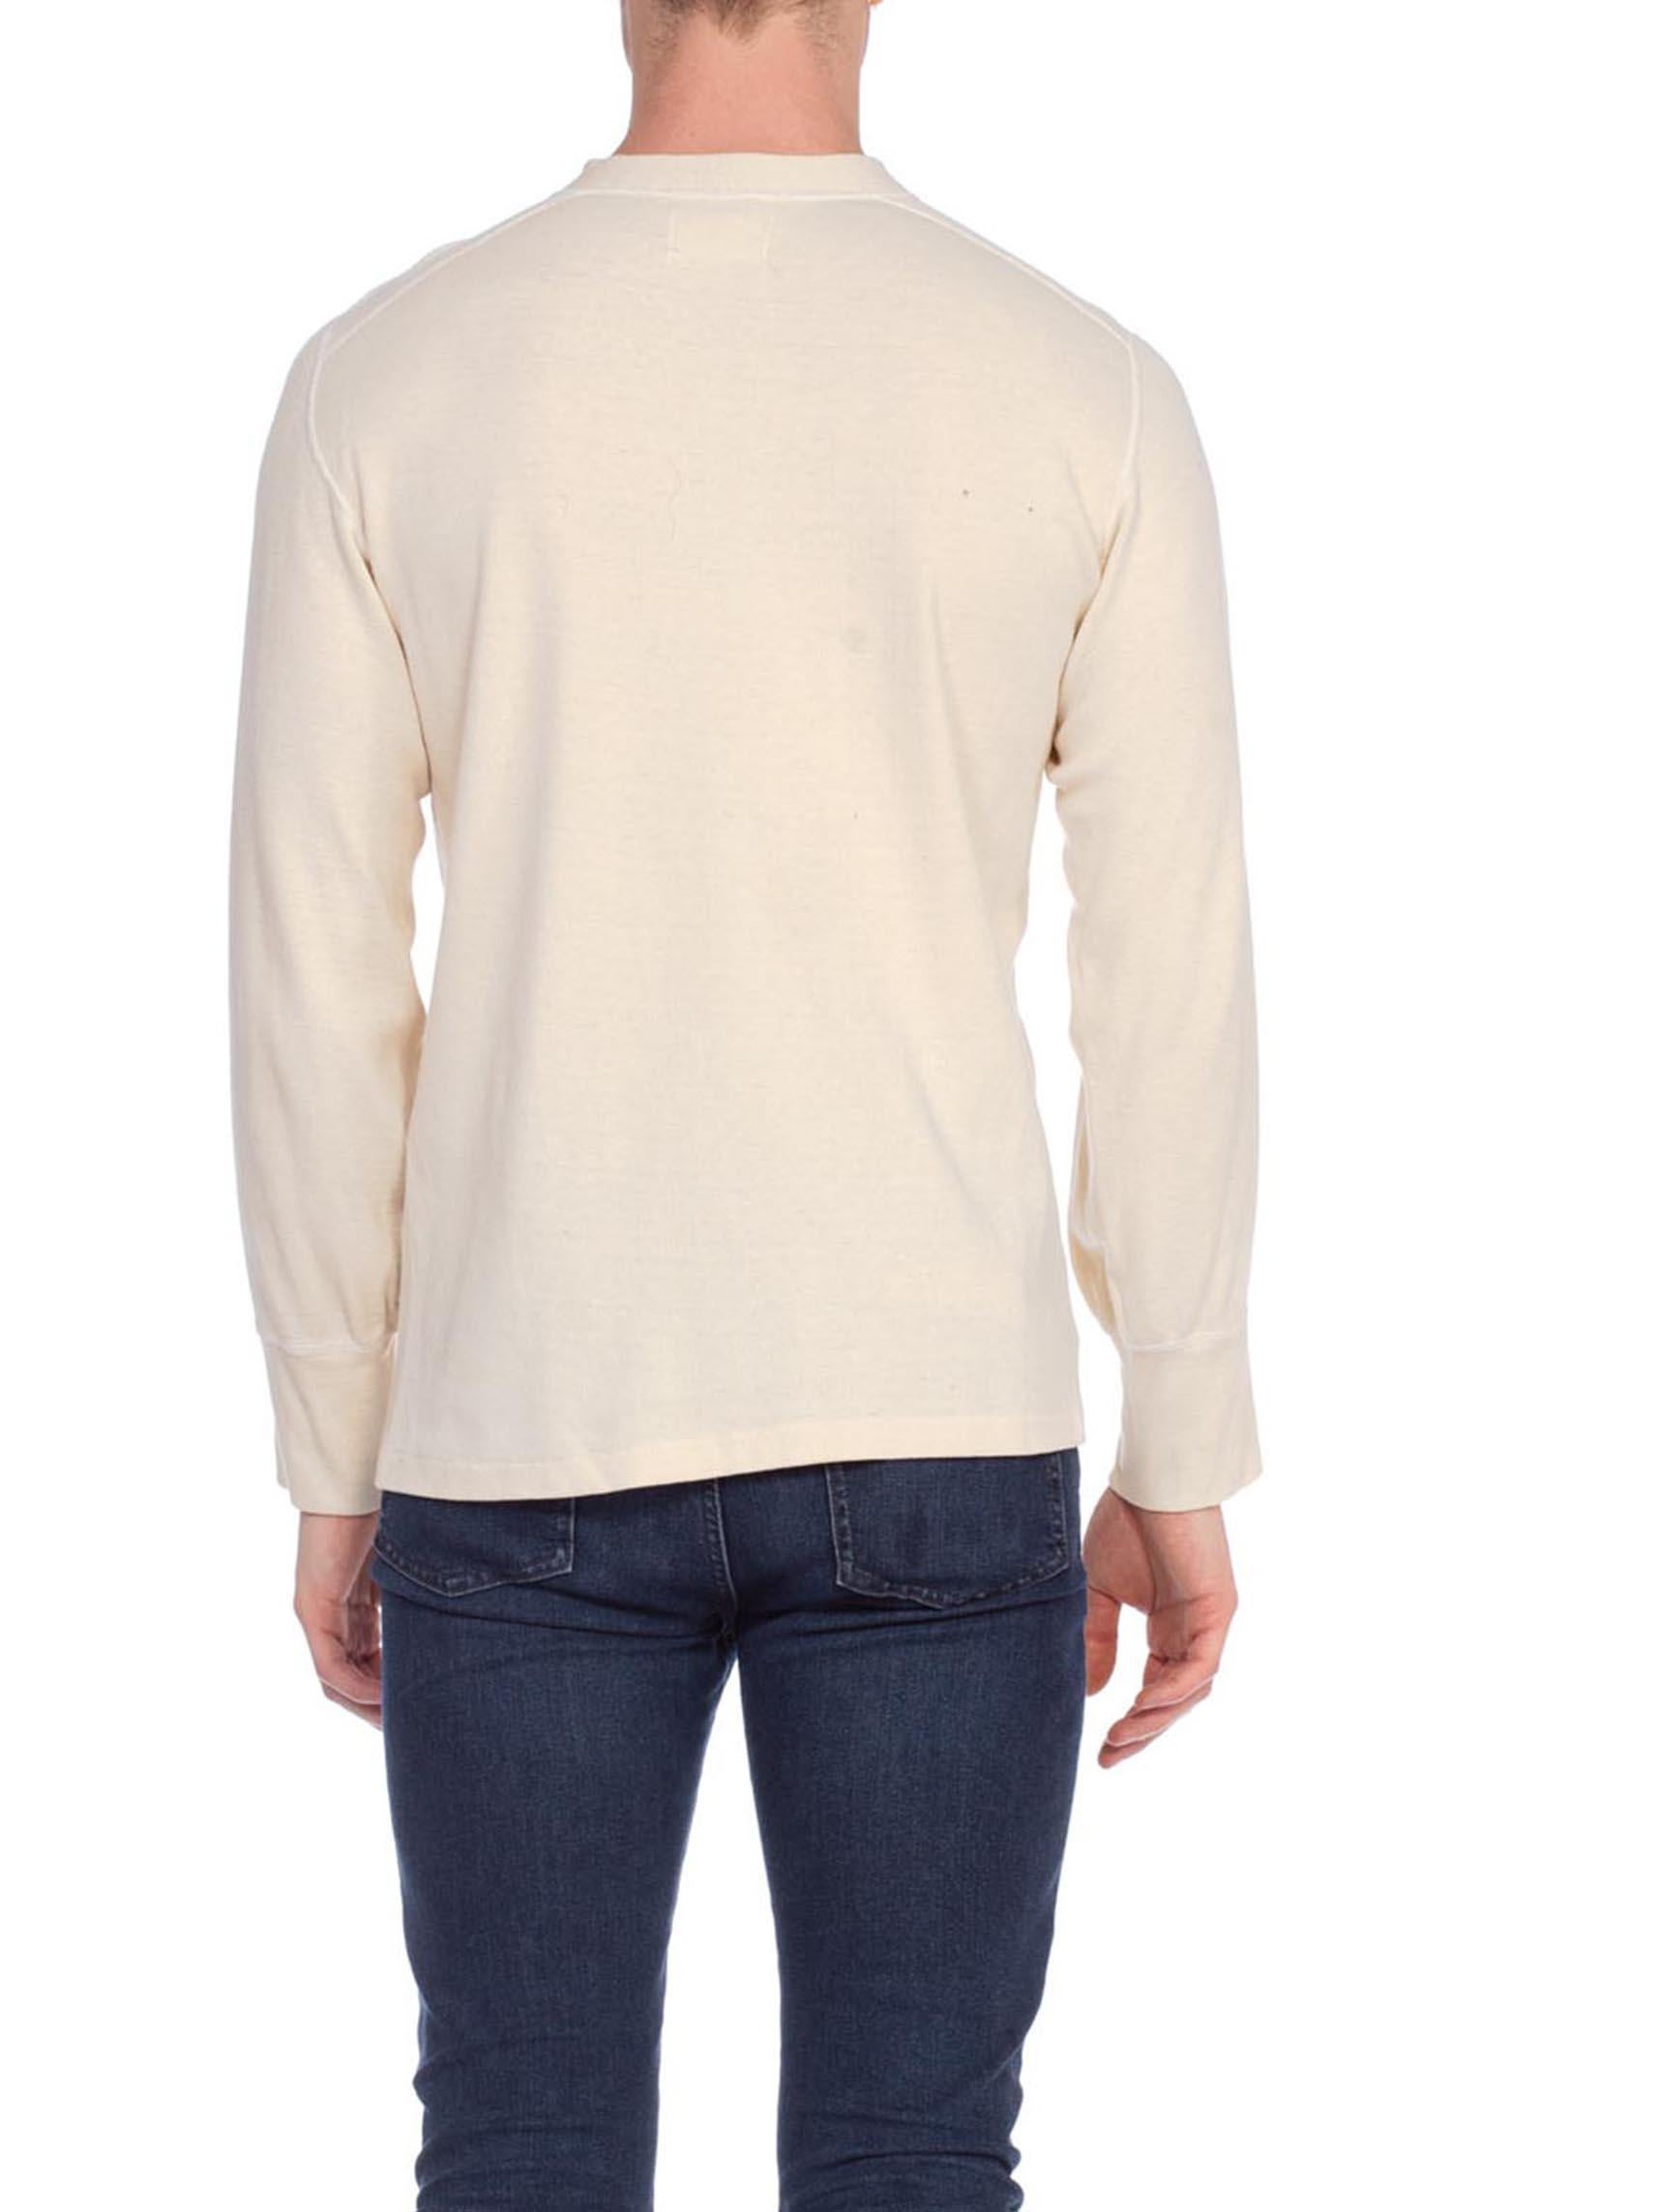 1940S Cream Wool/Cotton Jersey Men's Military Thermal Shirt In Excellent Condition For Sale In New York, NY